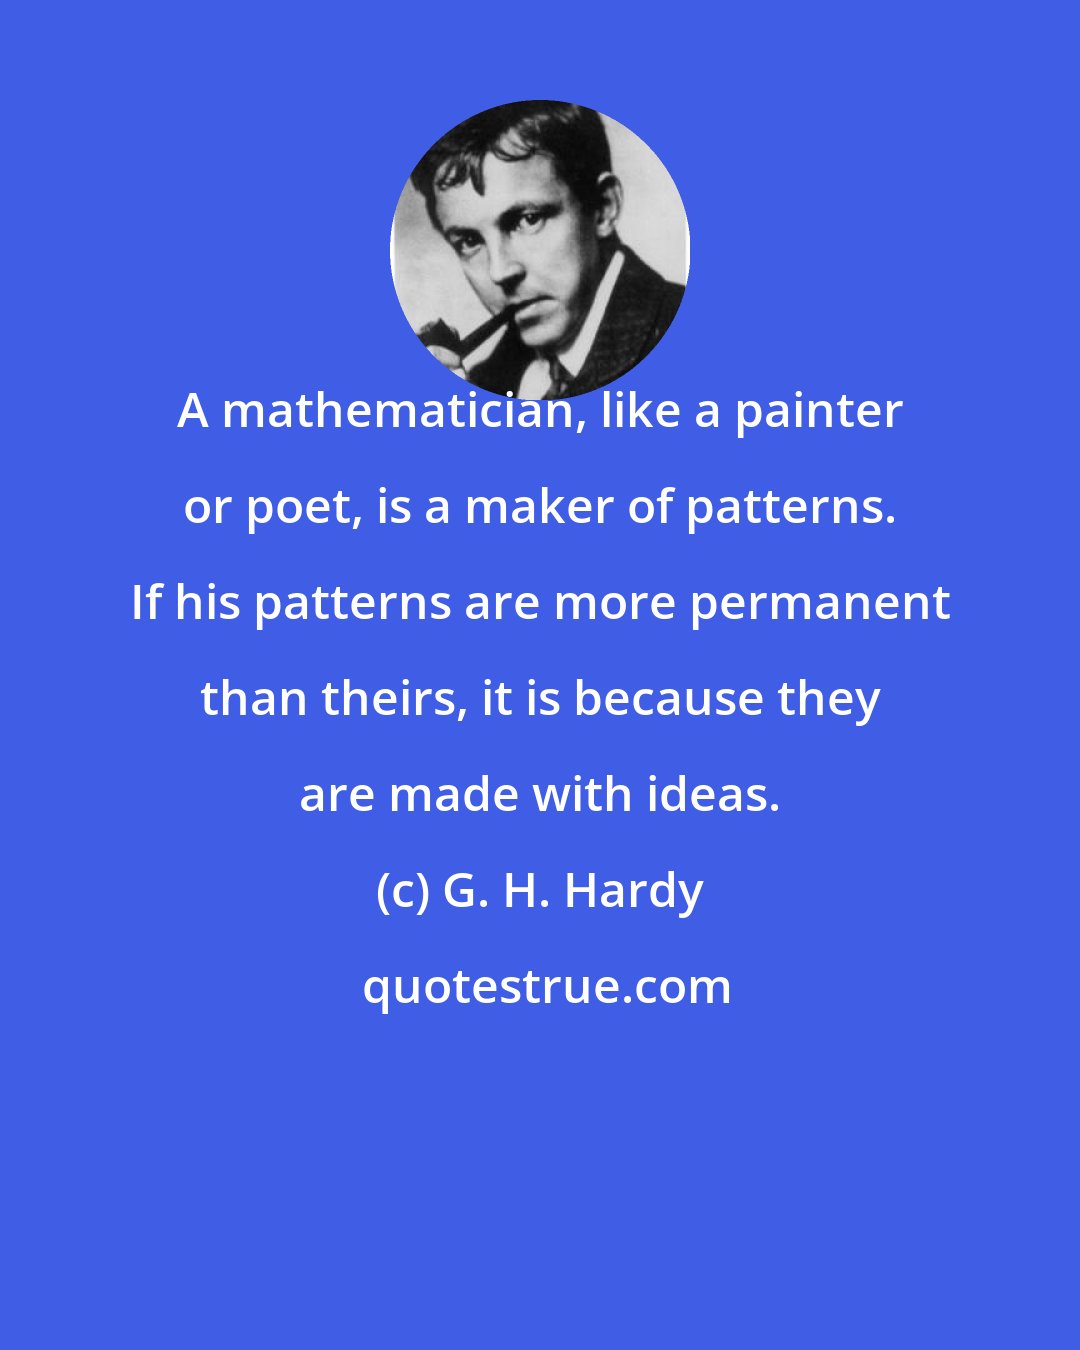 G. H. Hardy: A mathematician, like a painter or poet, is a maker of patterns. If his patterns are more permanent than theirs, it is because they are made with ideas.